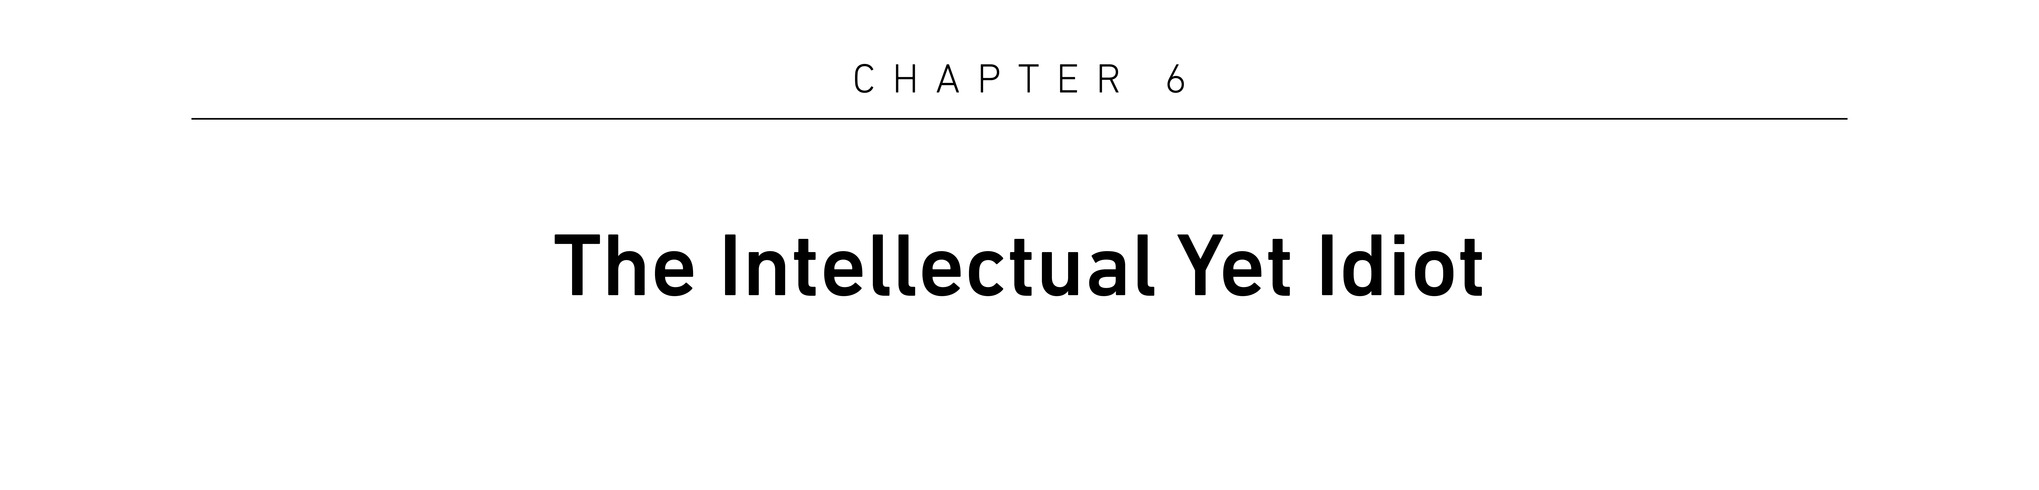 Chapter 6 The Intellectual Yet Idiot